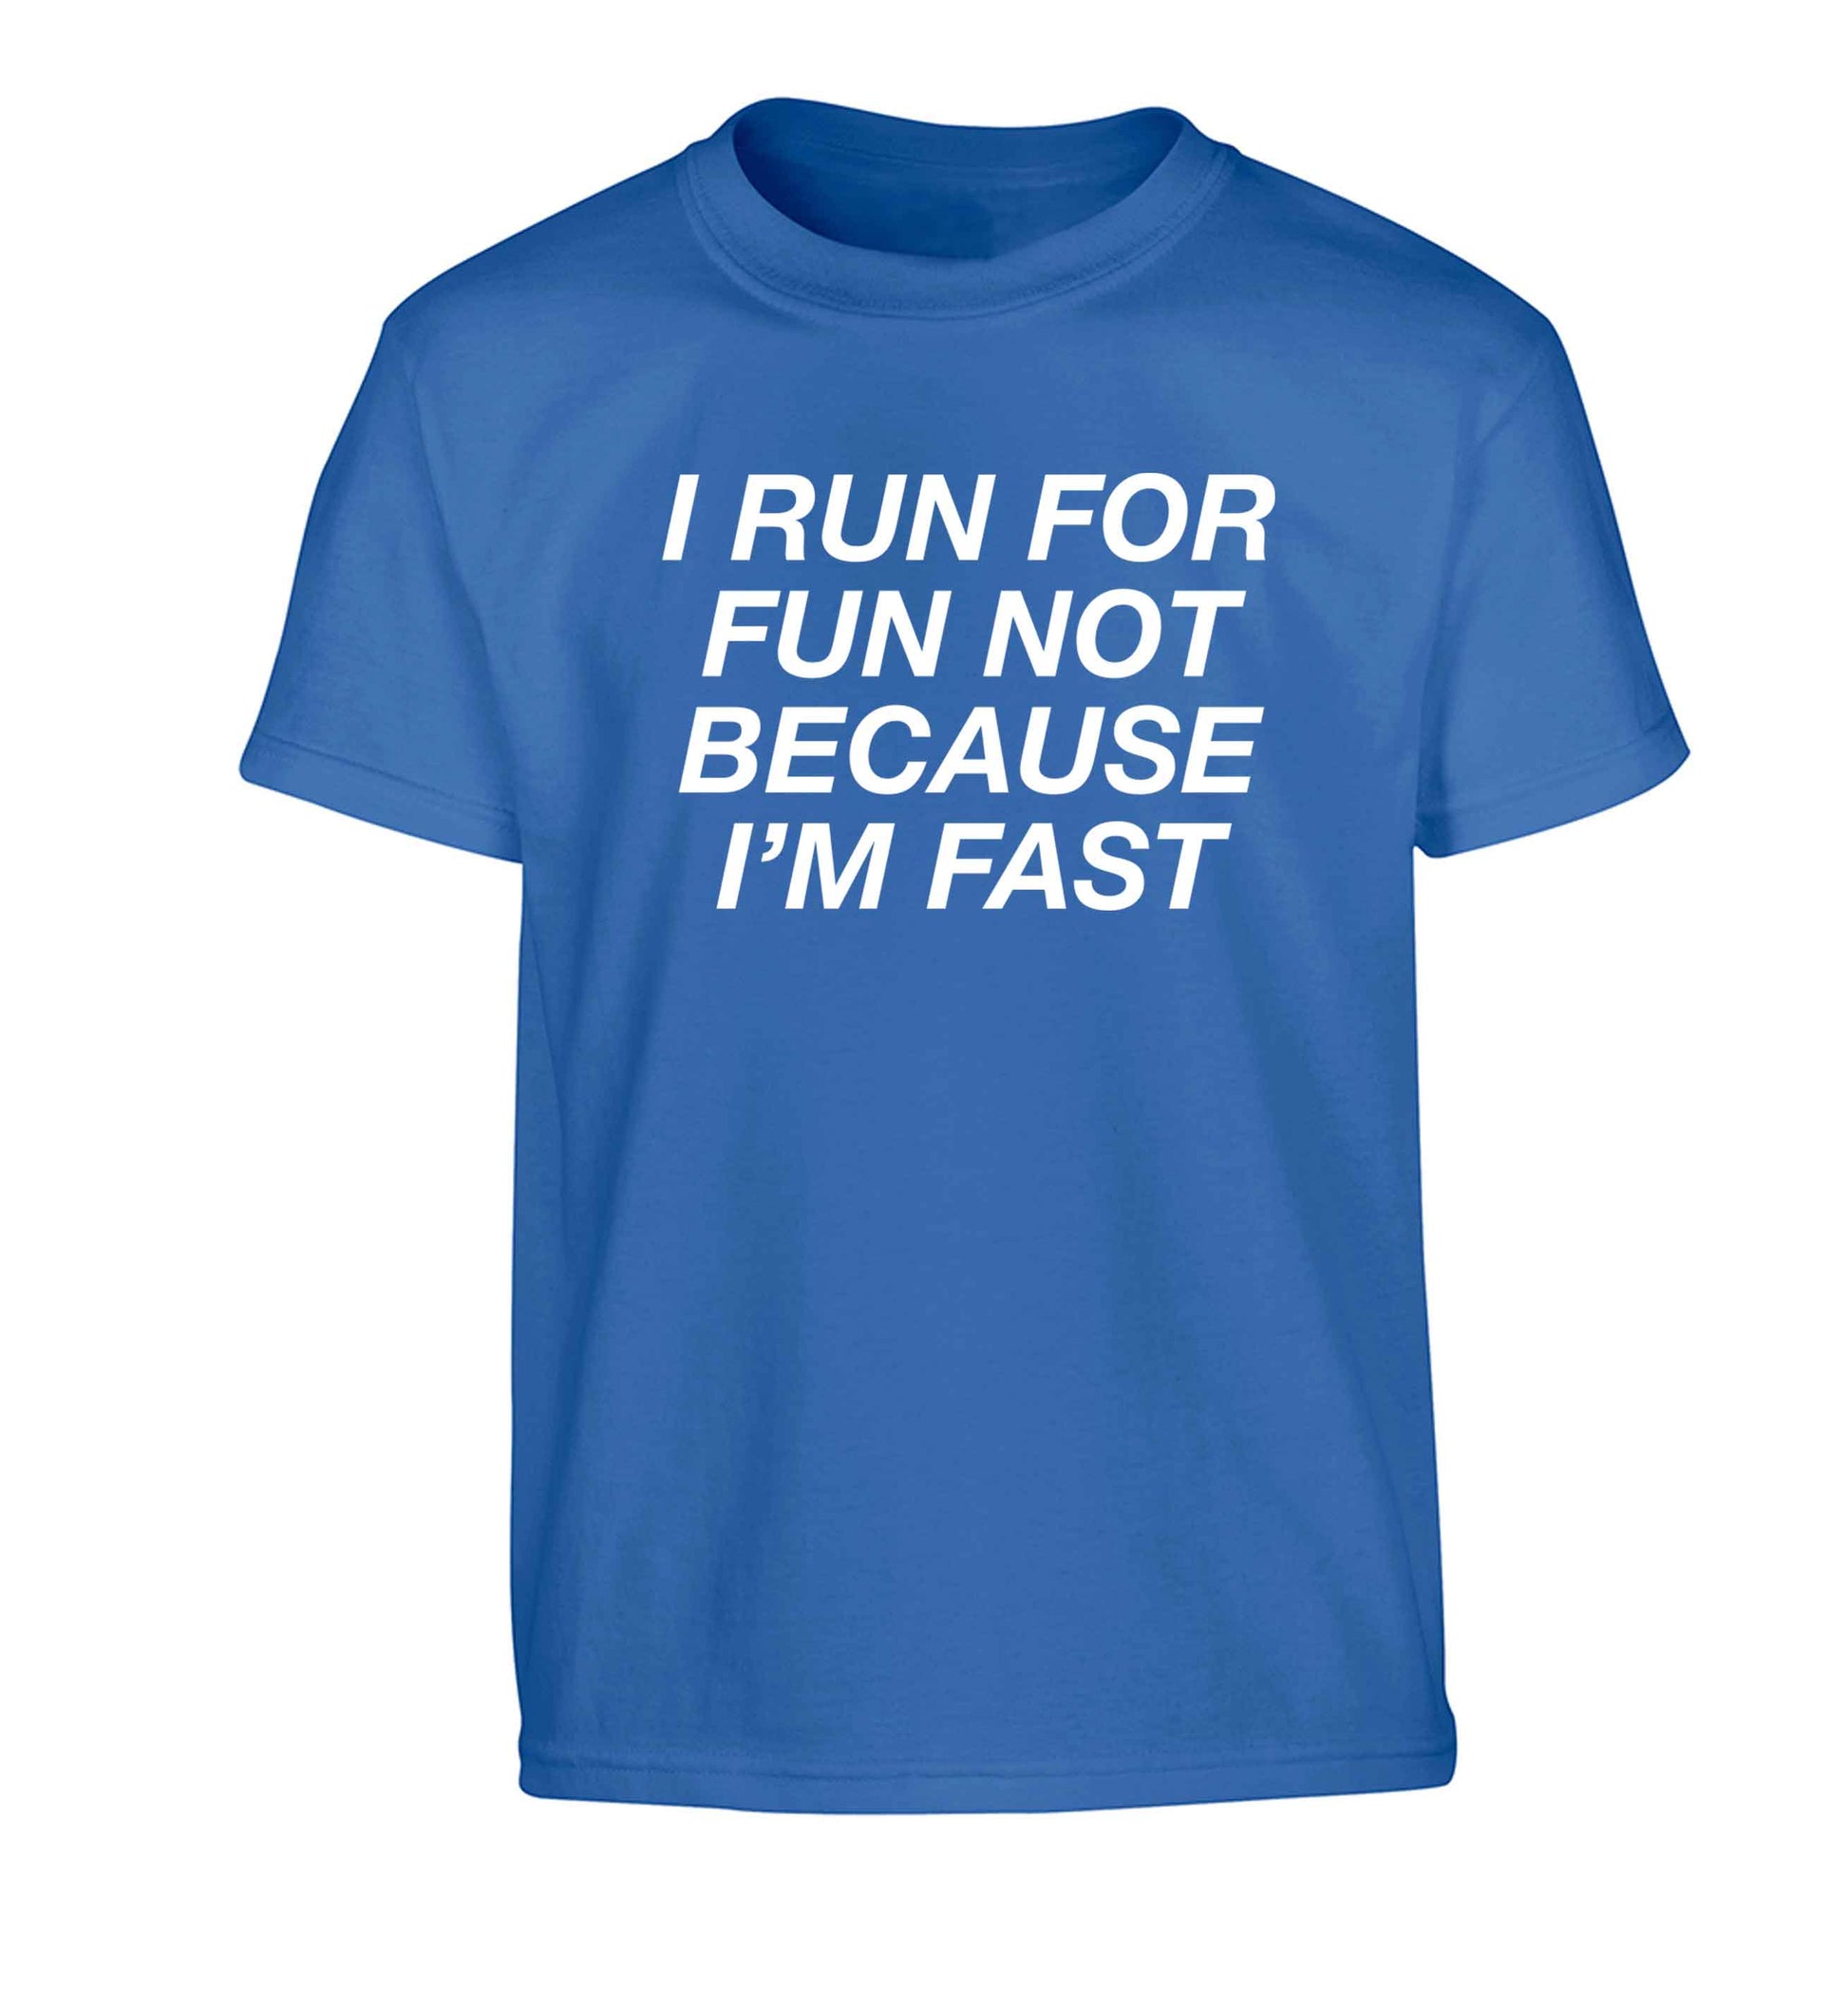 I run for fun not because I'm fast Children's blue Tshirt 12-13 Years